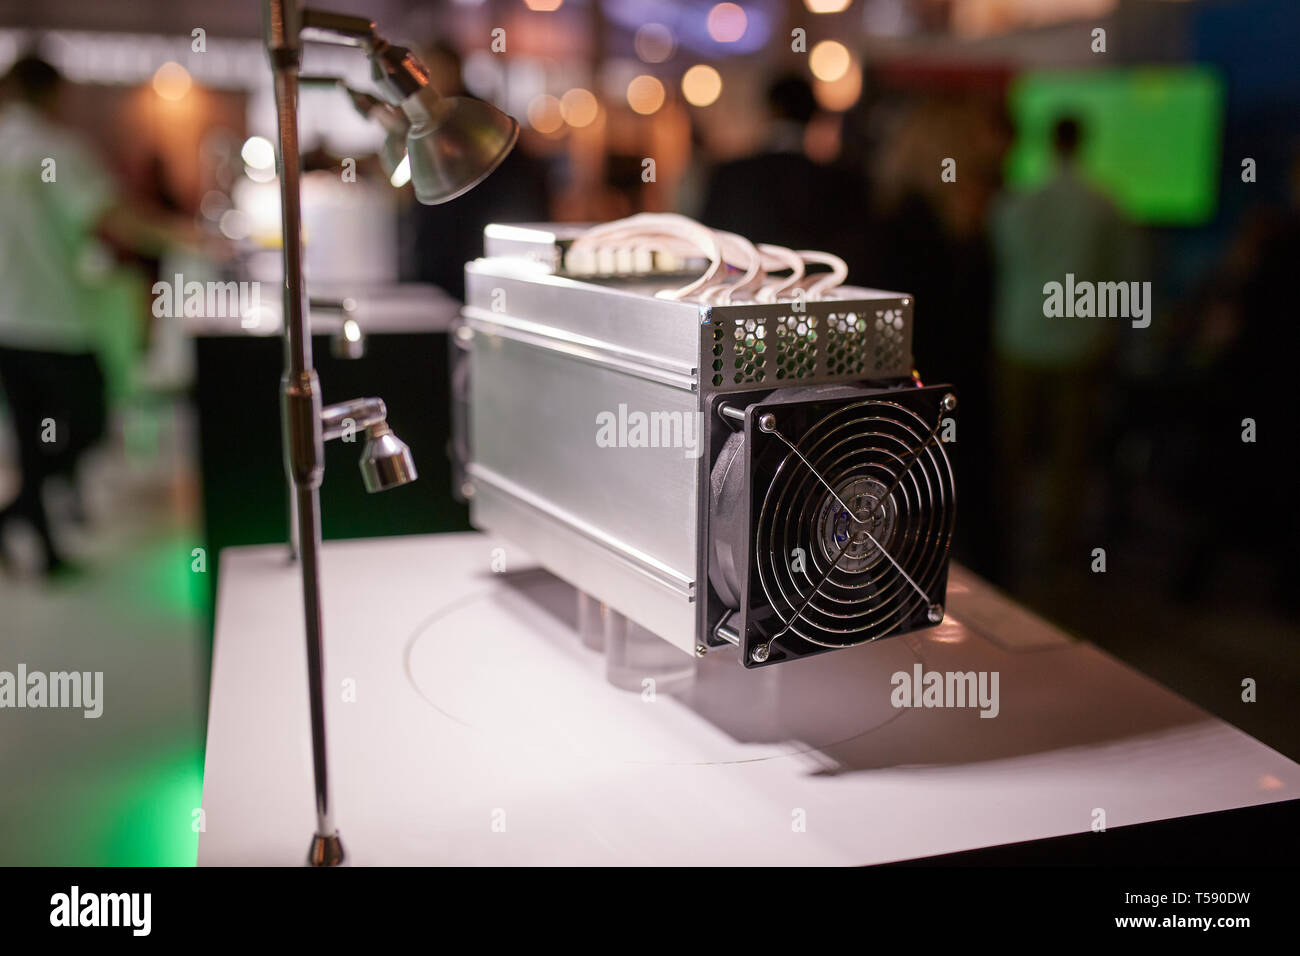 Cryptocurrency mining equipment - ASIC - application specific integrated  circuit on farm stand Stock Photo - Alamy